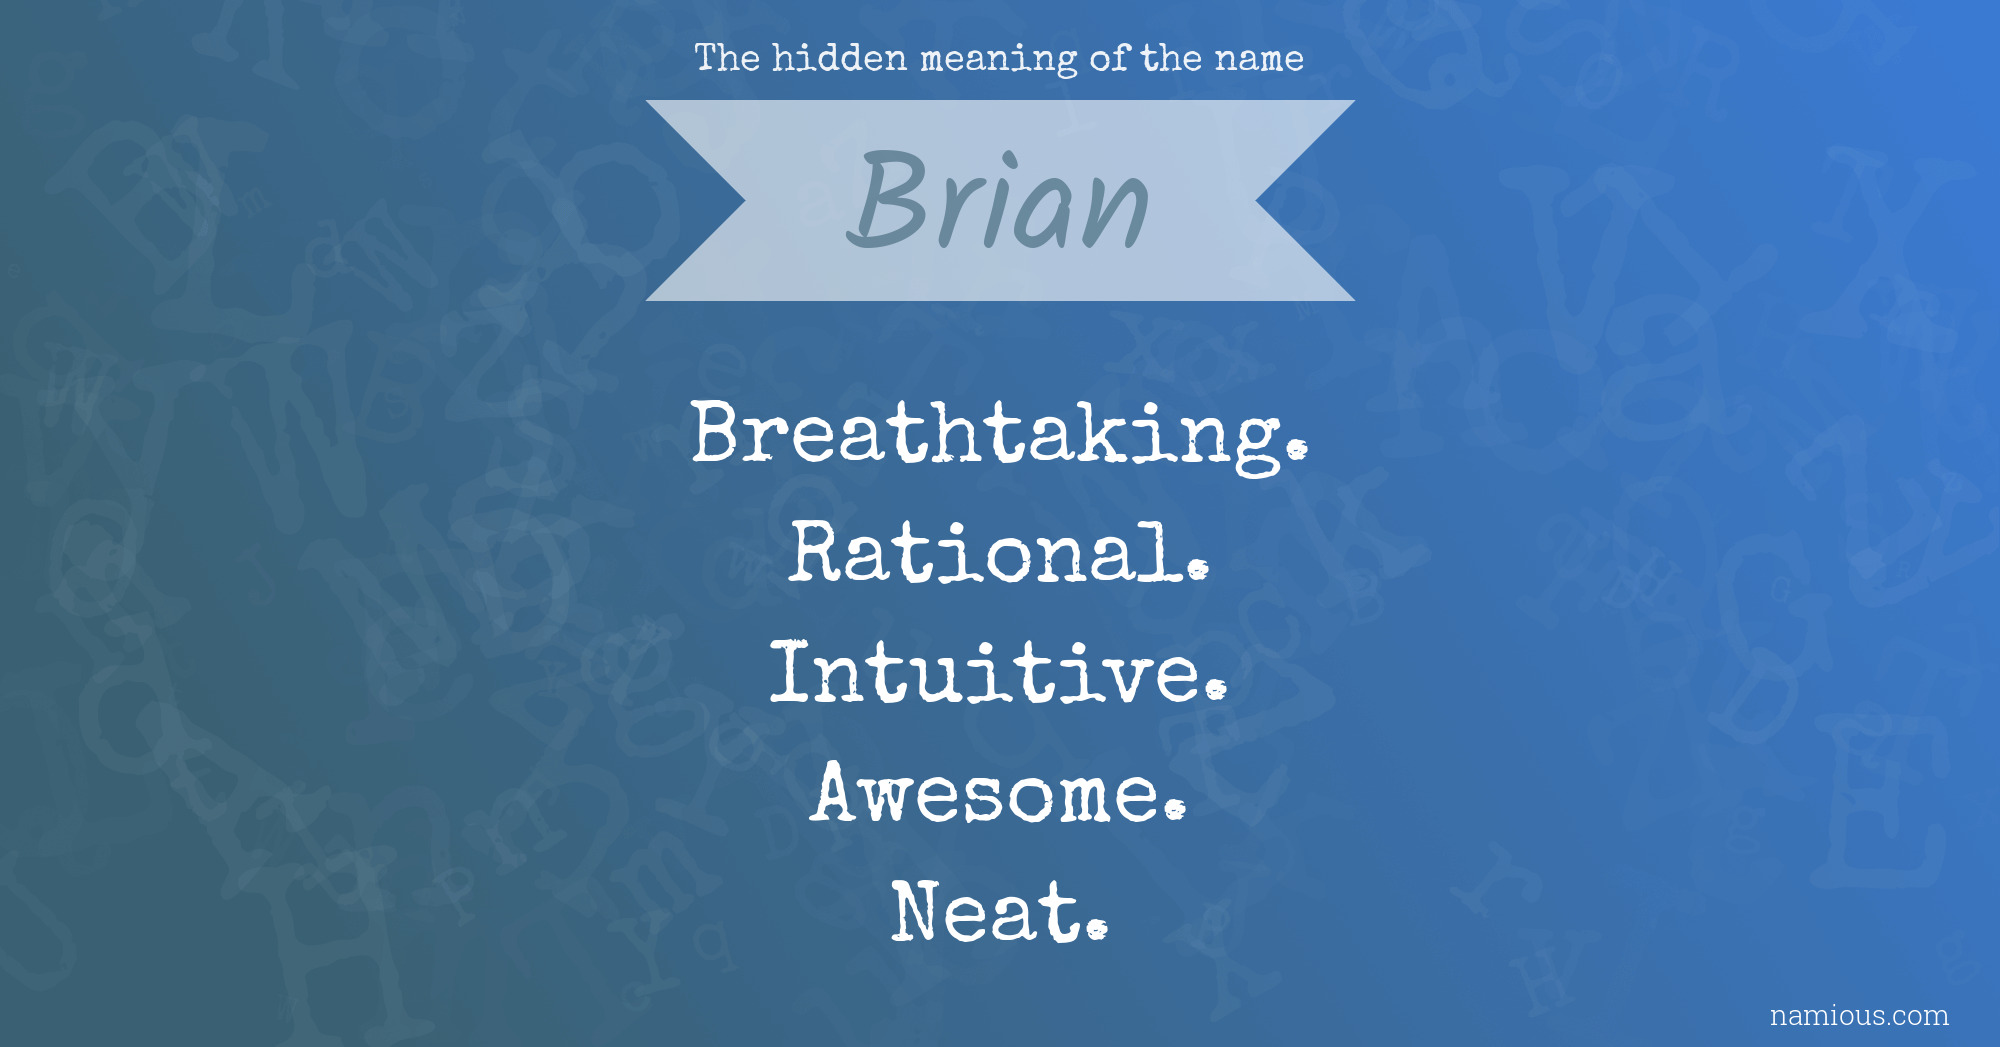 The hidden meaning of the name Brian